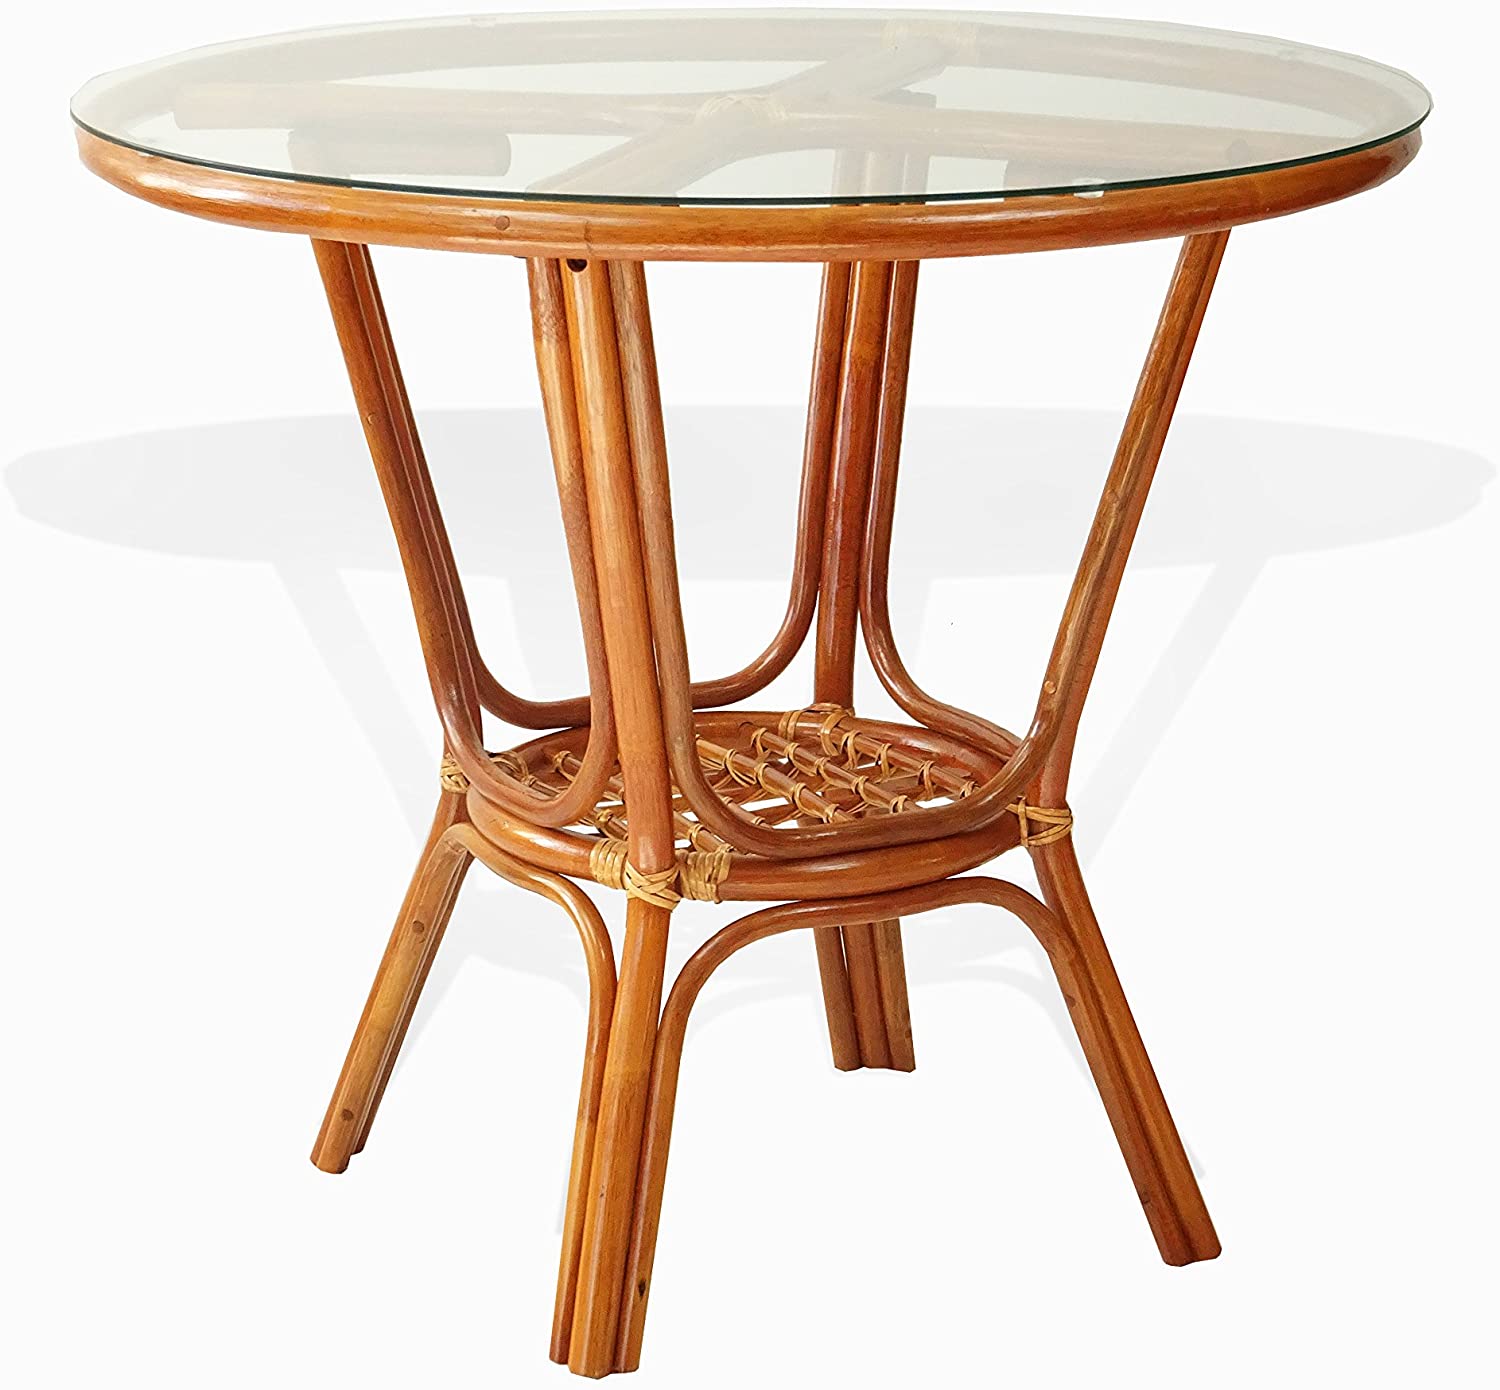 B0791LB9M5 Pelangi Rattan Wicker Round Dining Table with Glass Top, Colonial